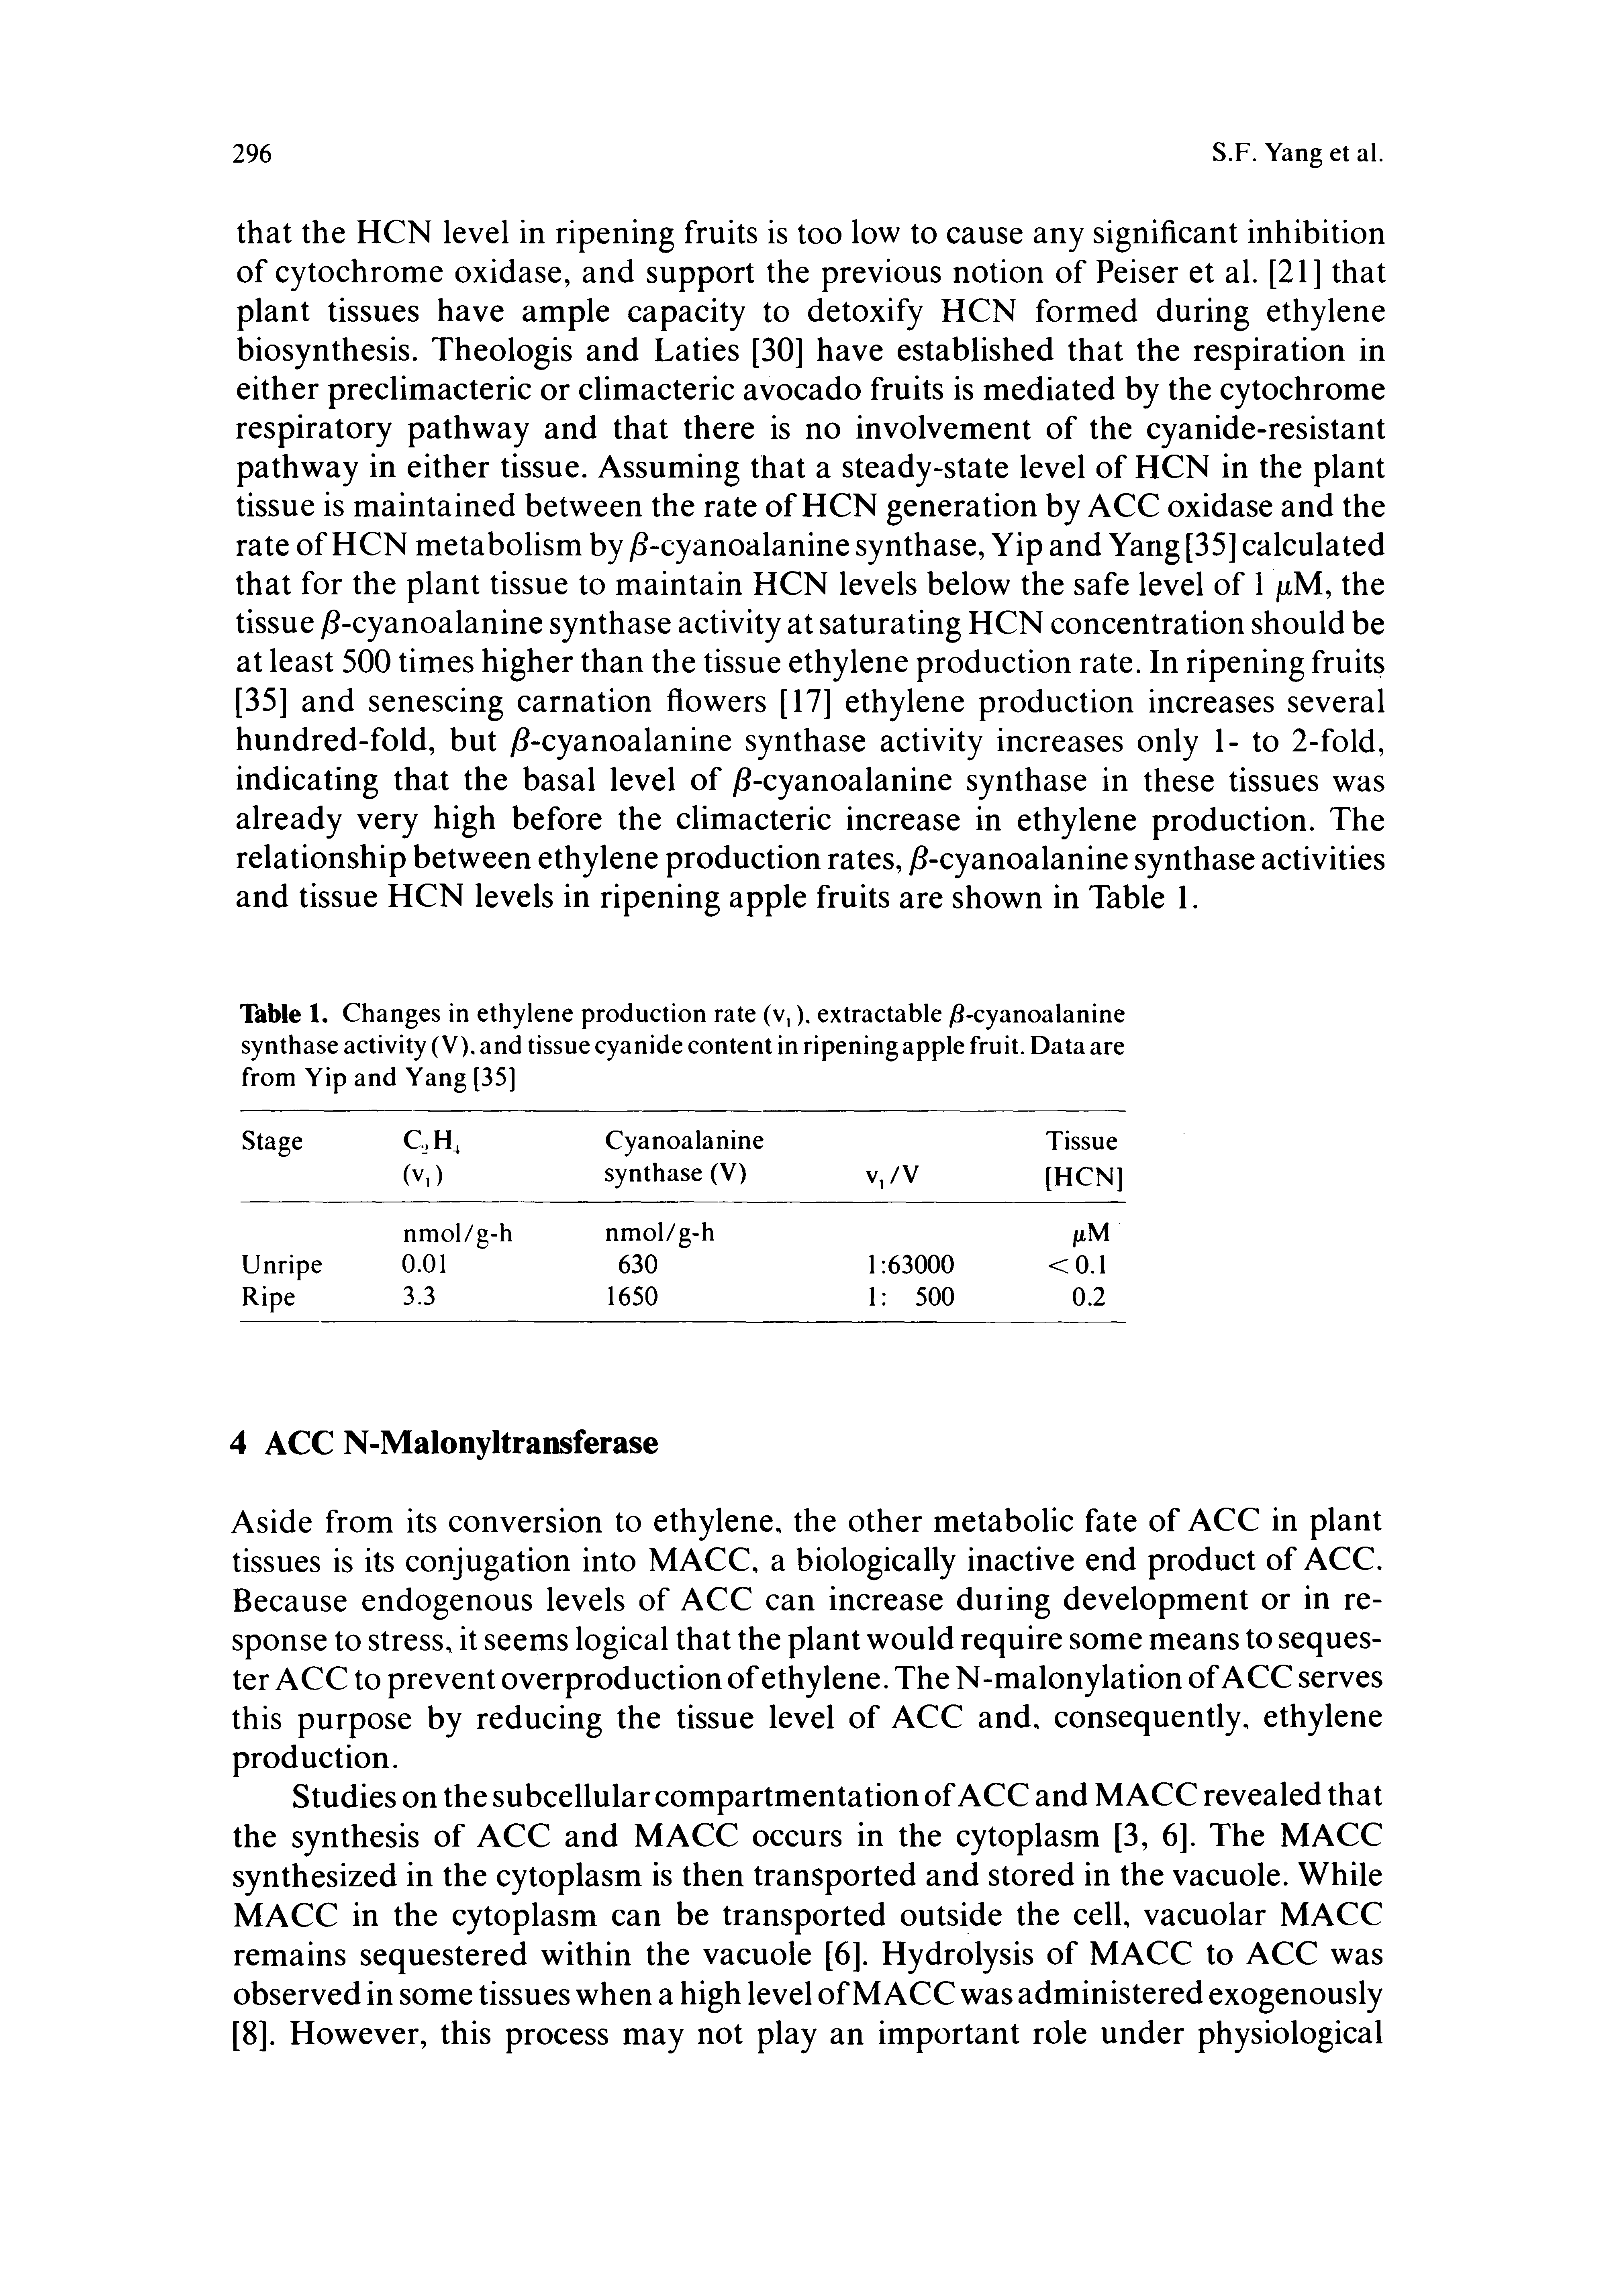 Table 1. Changes in ethylene production rate (v,), extractable )8-cyanoalanine synthase activity (V), and tissue cyanide content in ripening apple fruit. Data are from Yip and Yang [35]...